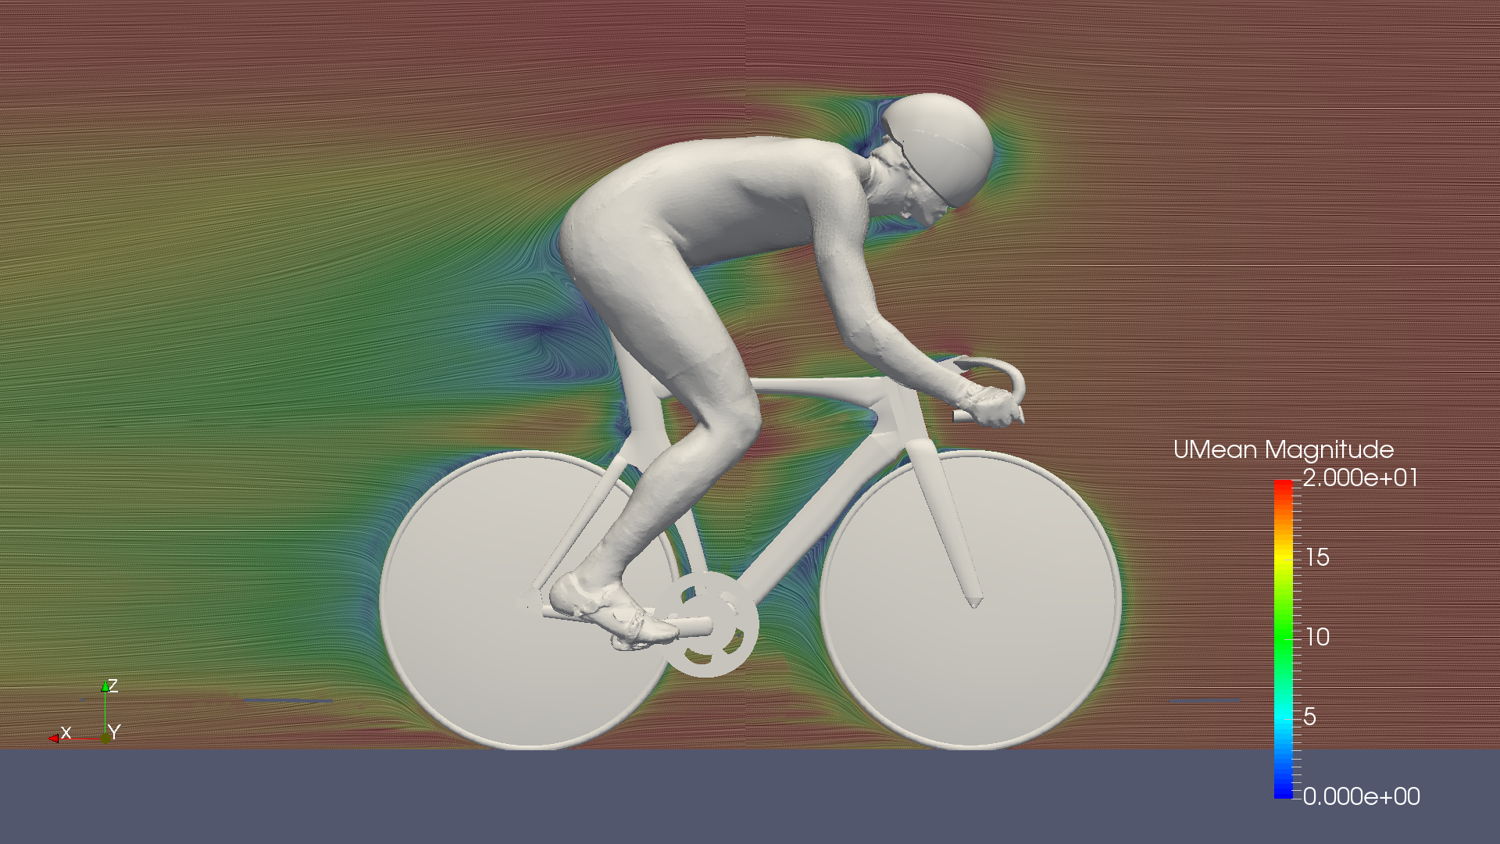 With the help of the latest airflow research and modern camera technology, which is usually only used in the development of vehicle prototypes, the experts at ŠKODA analysed the aerodynamics of the Olympic athlete and his bicycle.